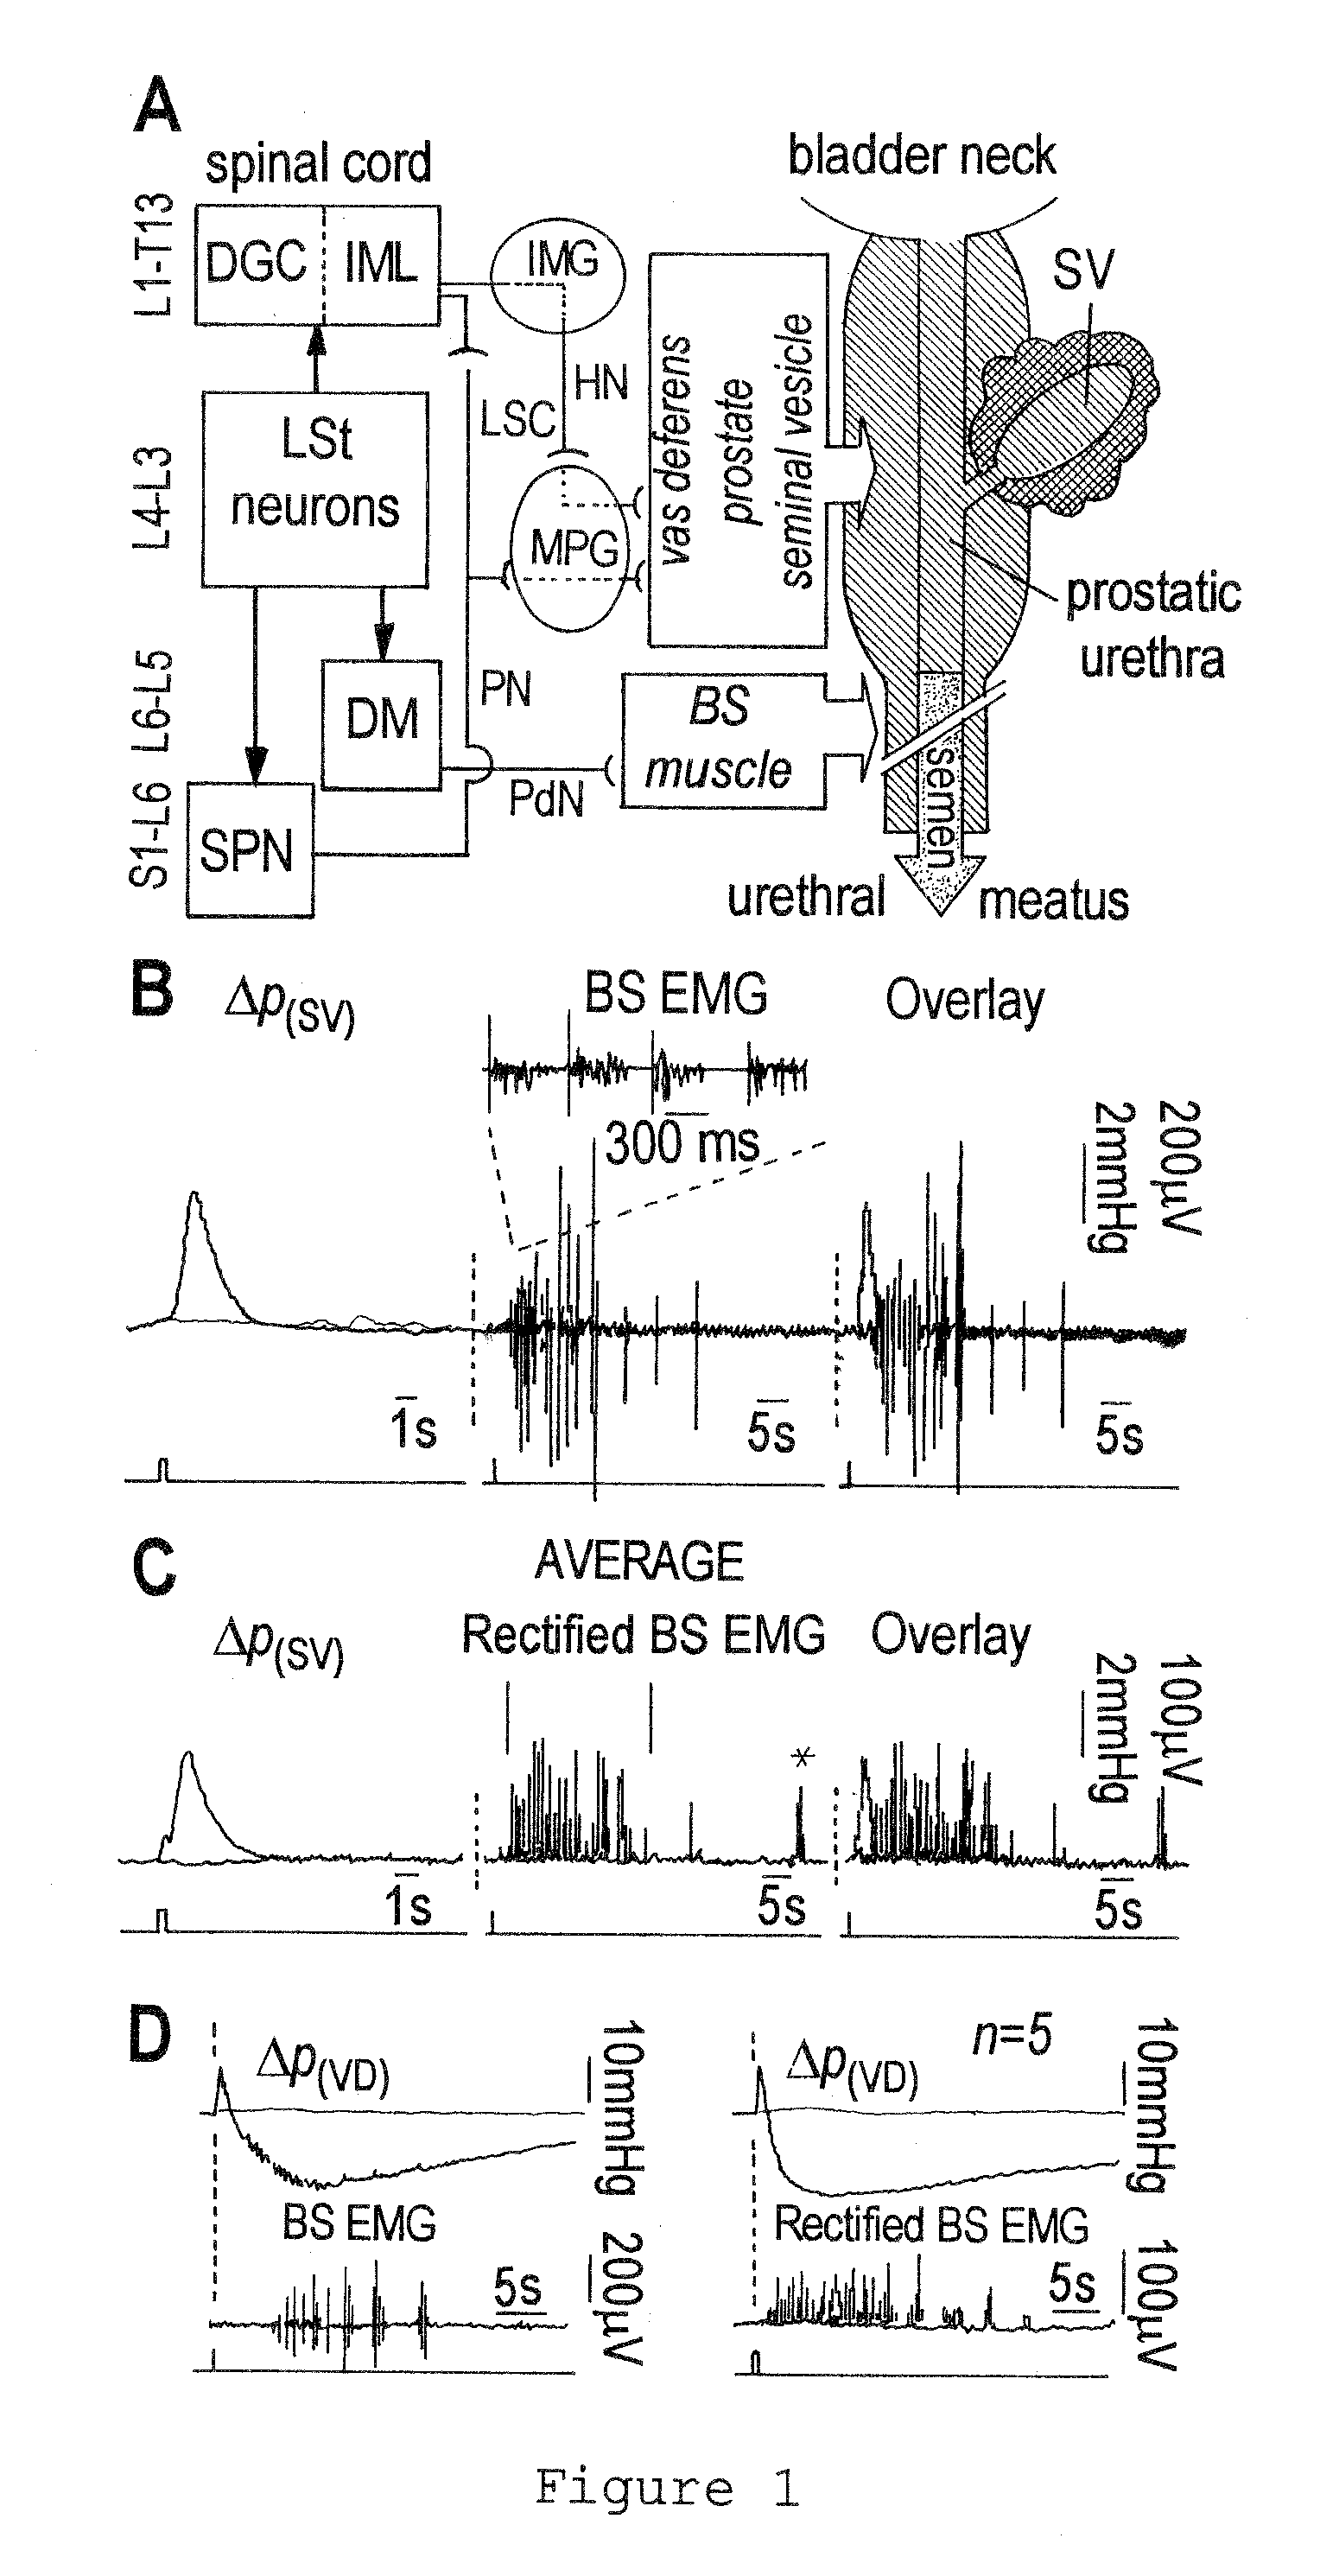 Method for restoring an ejaculatory failure